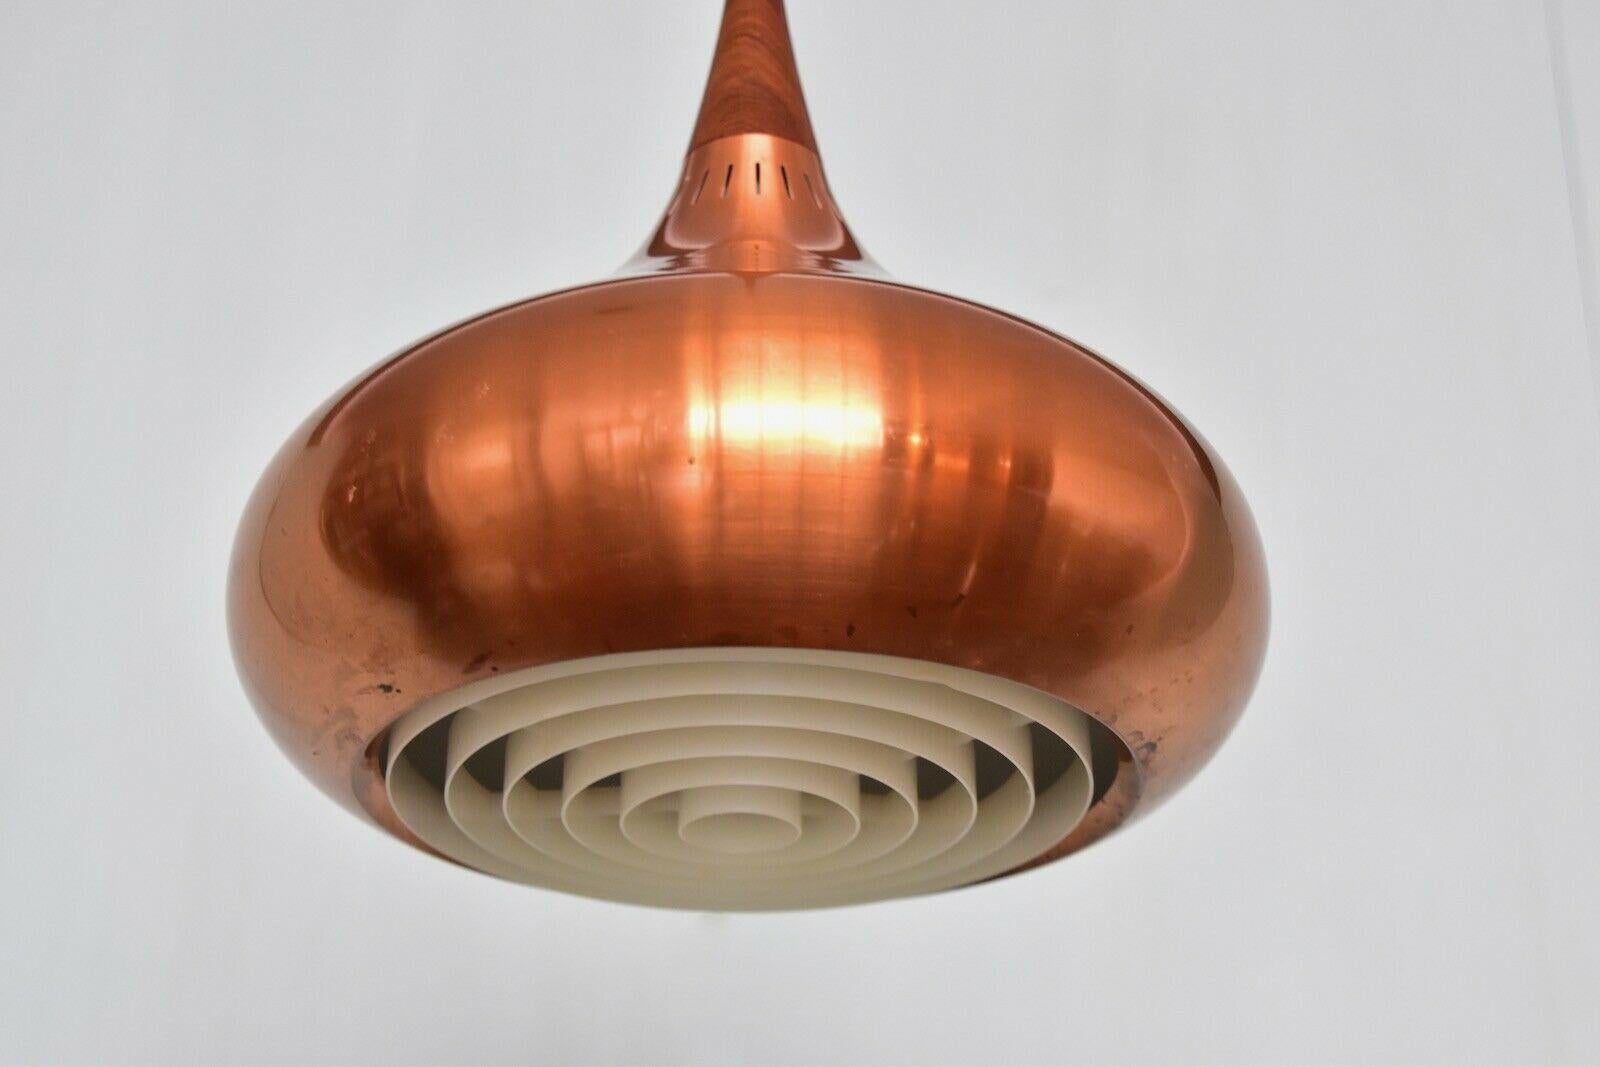 Jo Hammerborg orient pendant lamp for Fog & Mørup.
Copper colored metal, with black plastic cord and E26/27 Edision screw porcelain socket. Good condition with nice patina and plastic cover plate. No parts missing and ready to use with 110 or 250